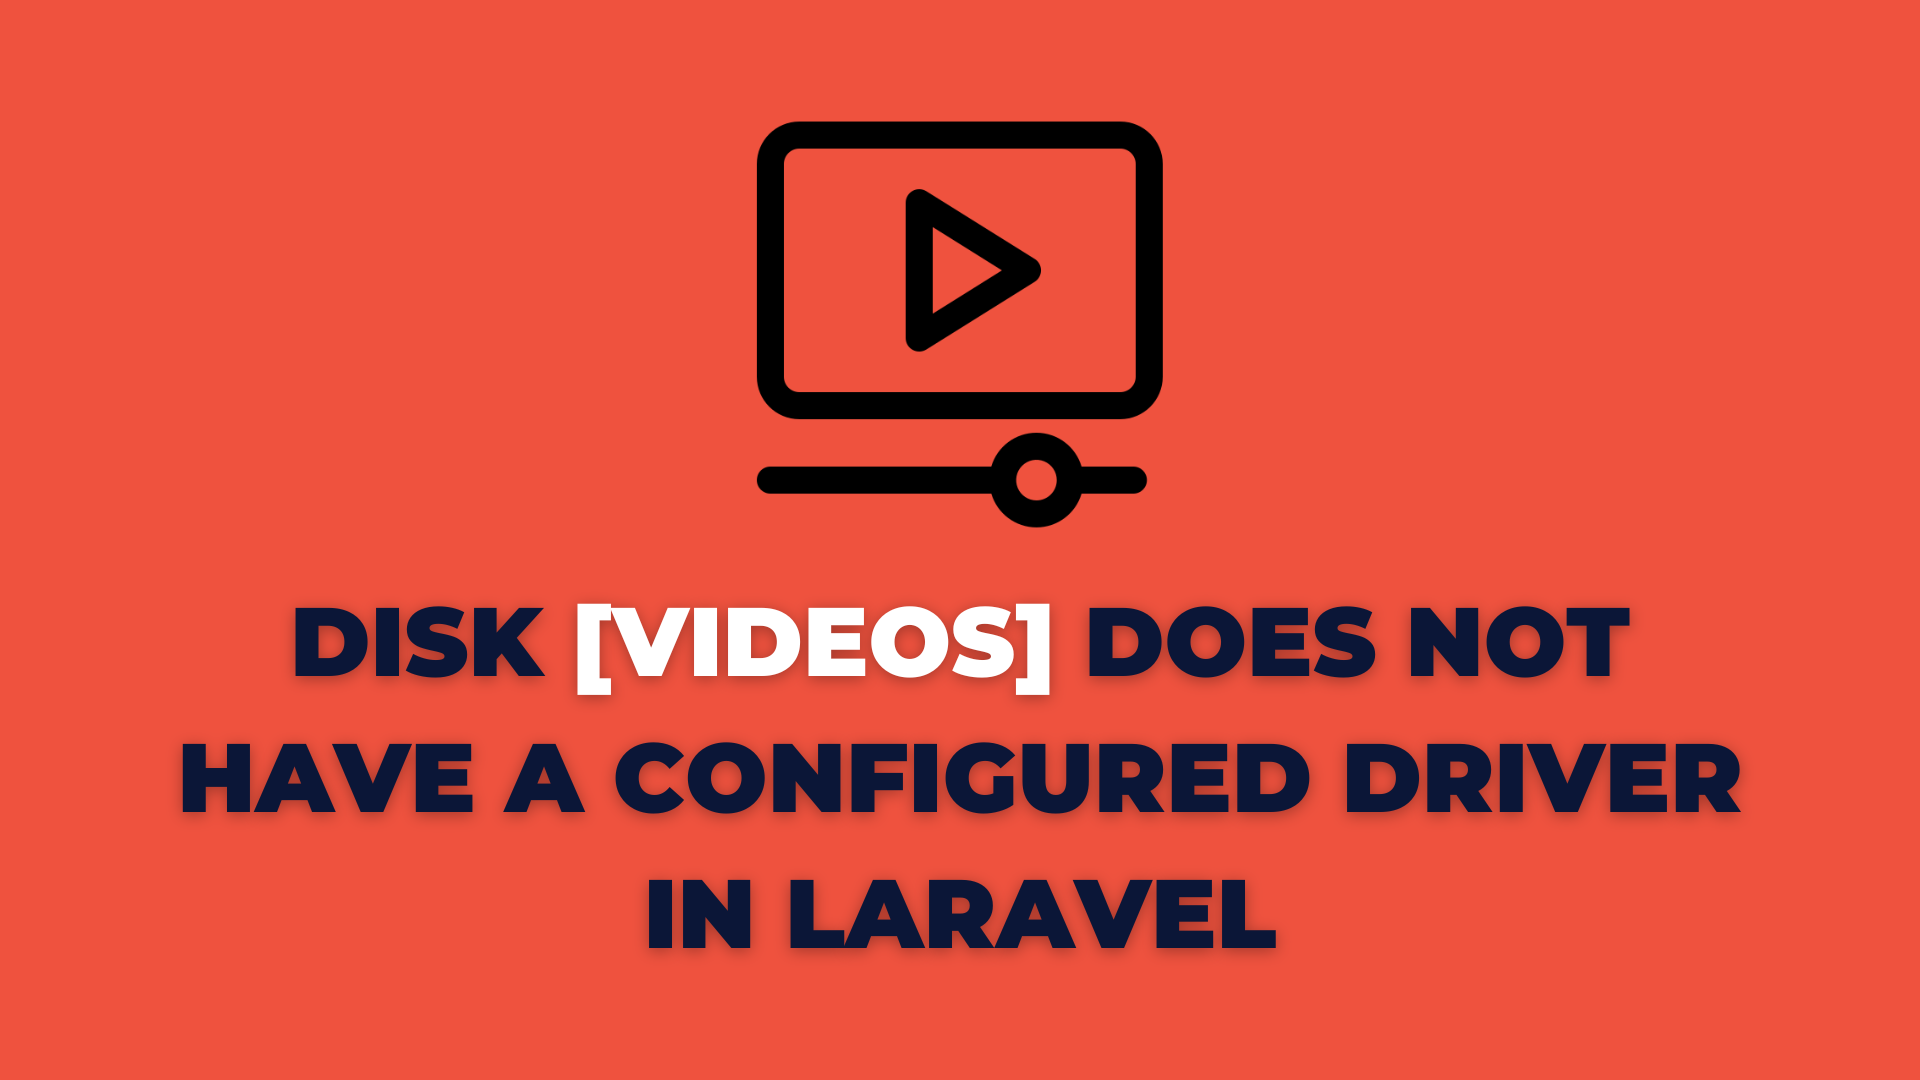 Disk [Videos] does not have a configured driver in Laravel